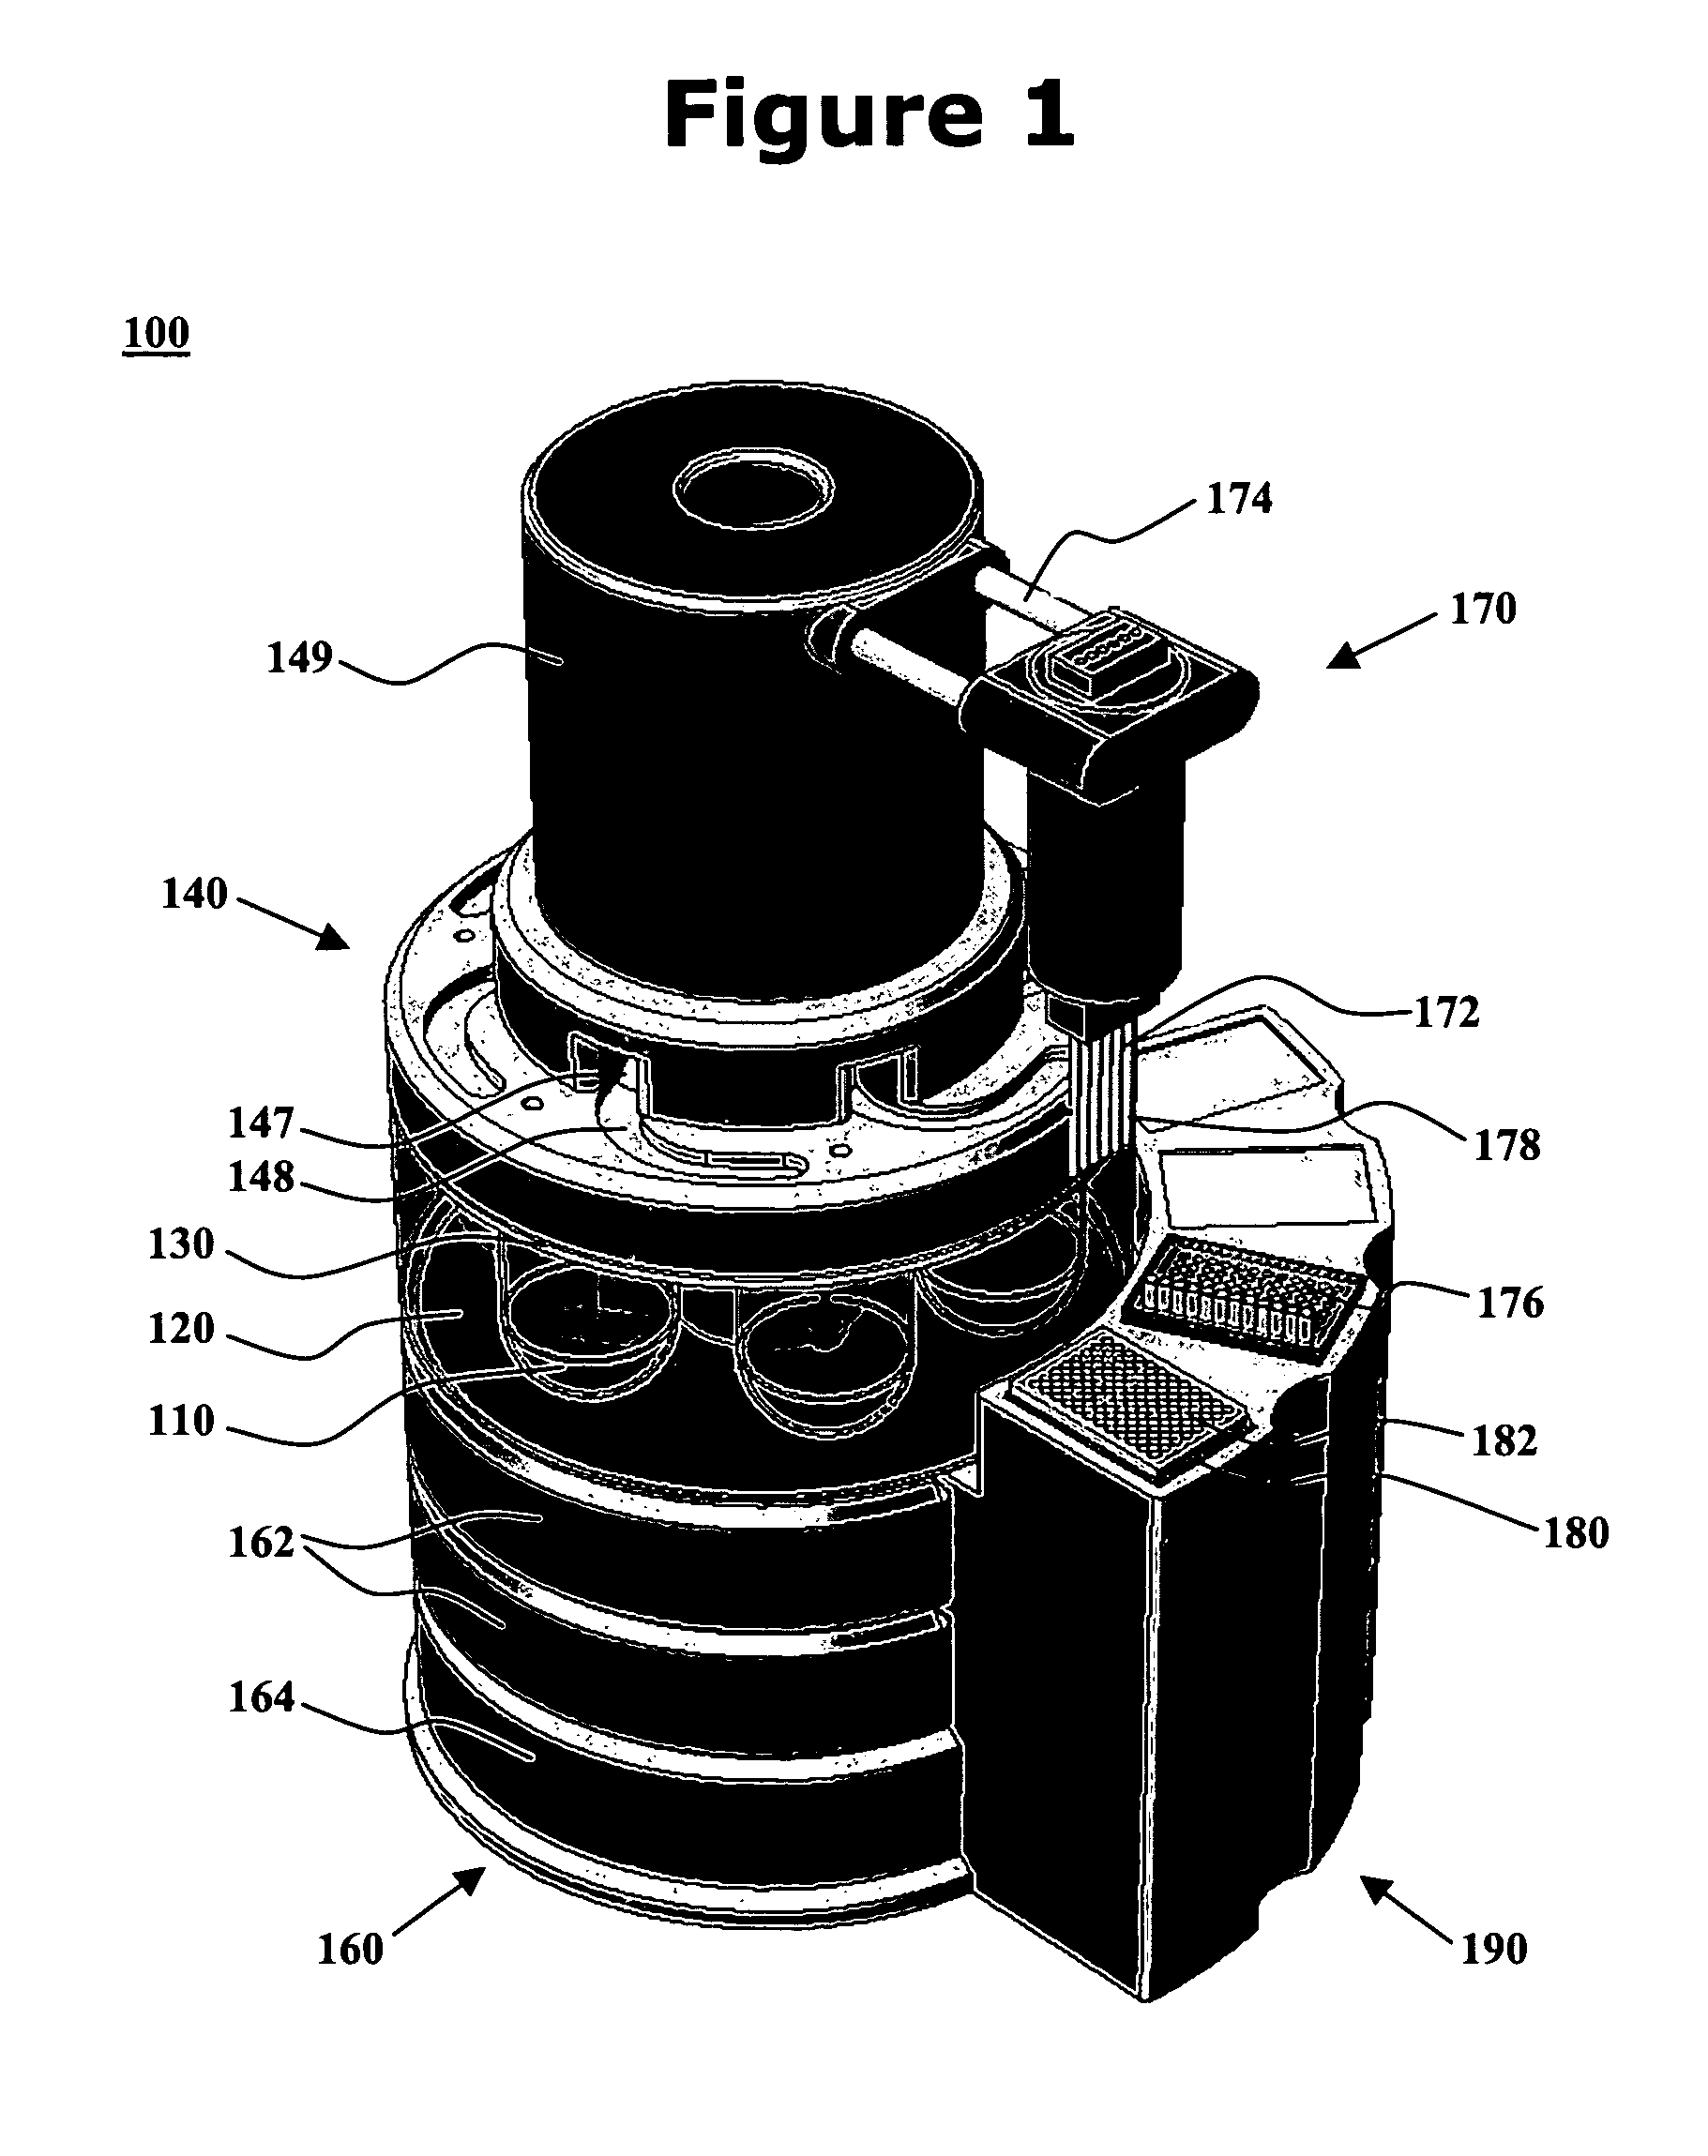 Integrated dissolution processing and sample transfer system